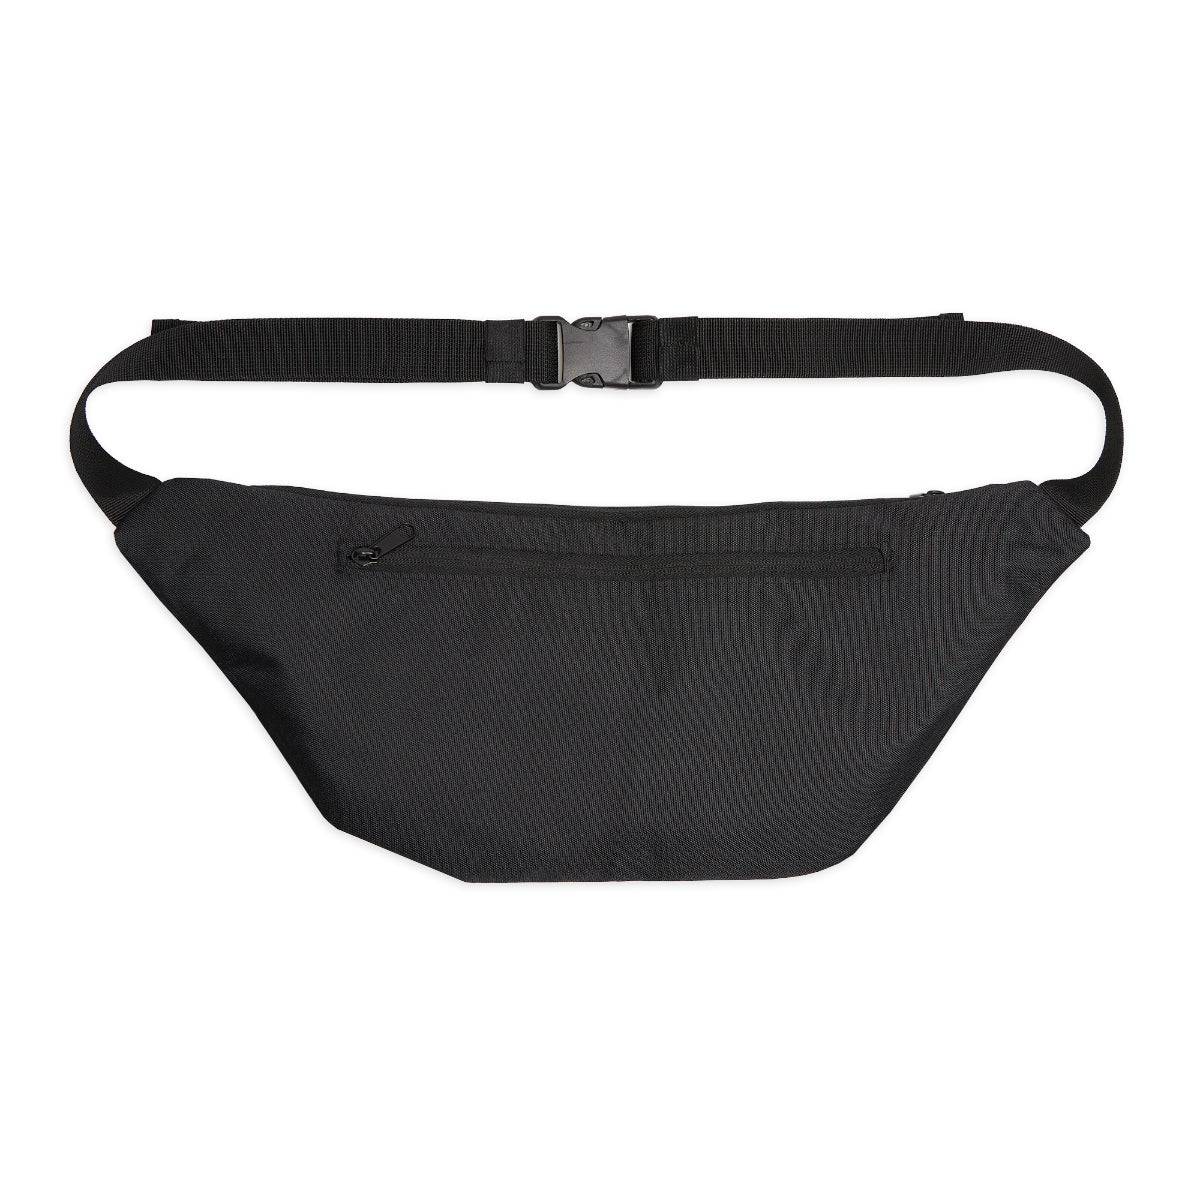 a black fanny pack